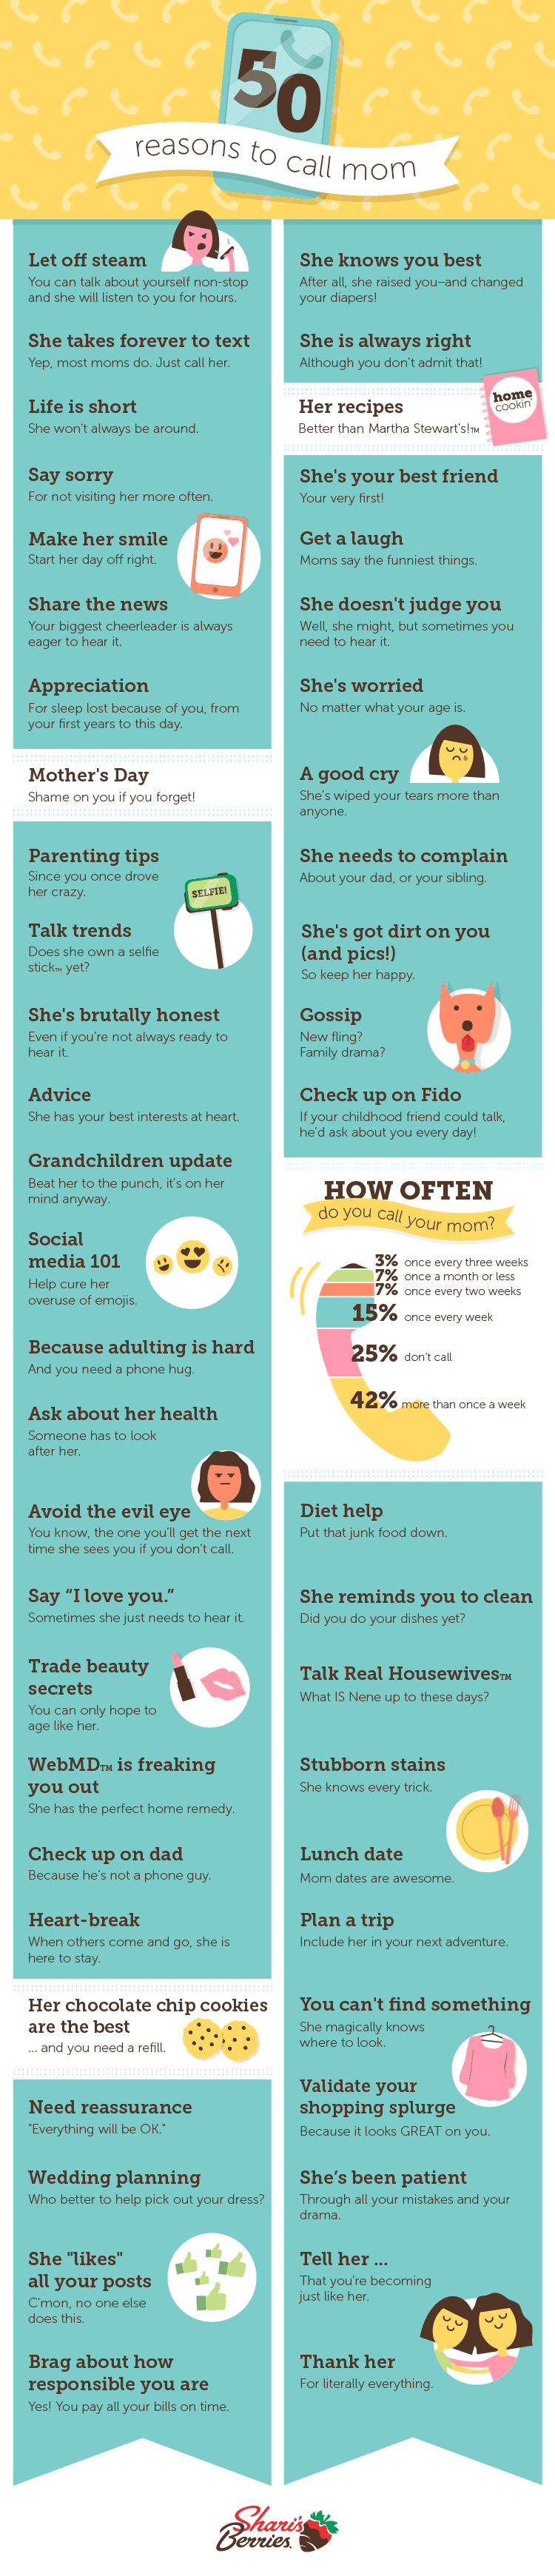 reasons to call mom infographic